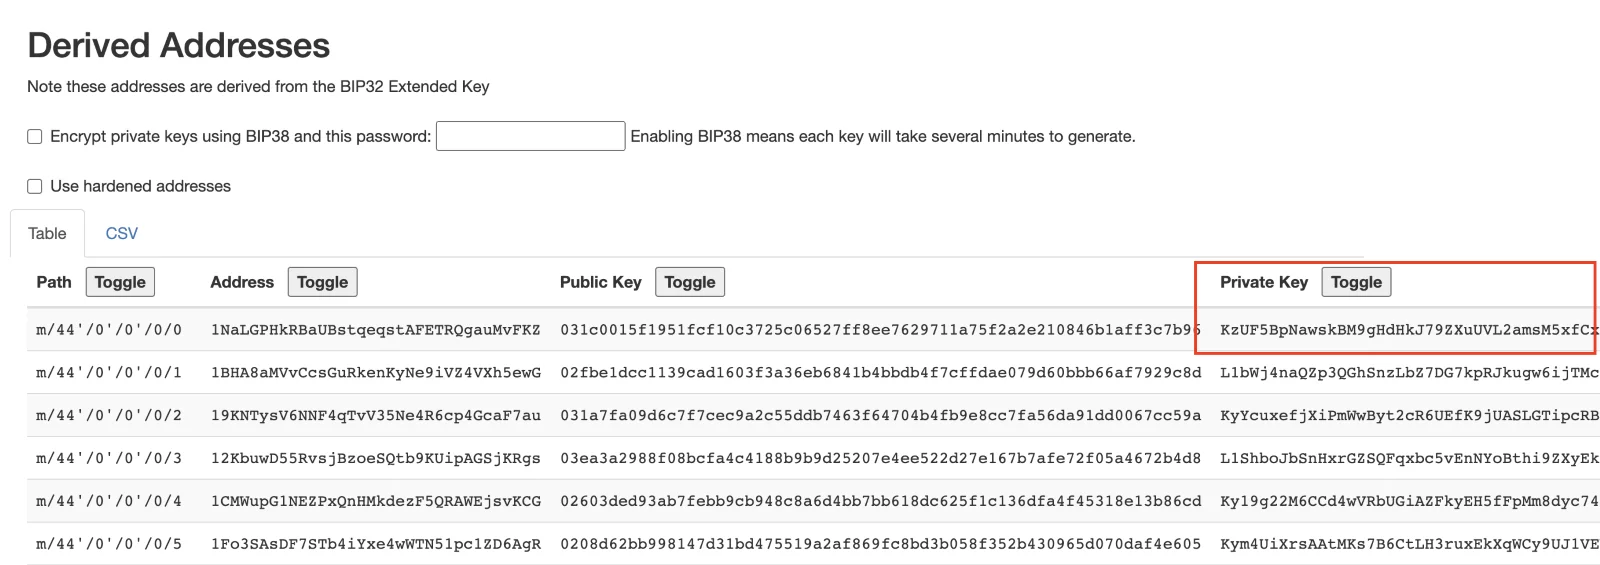 Step 8. Copy the Generated Private Key 